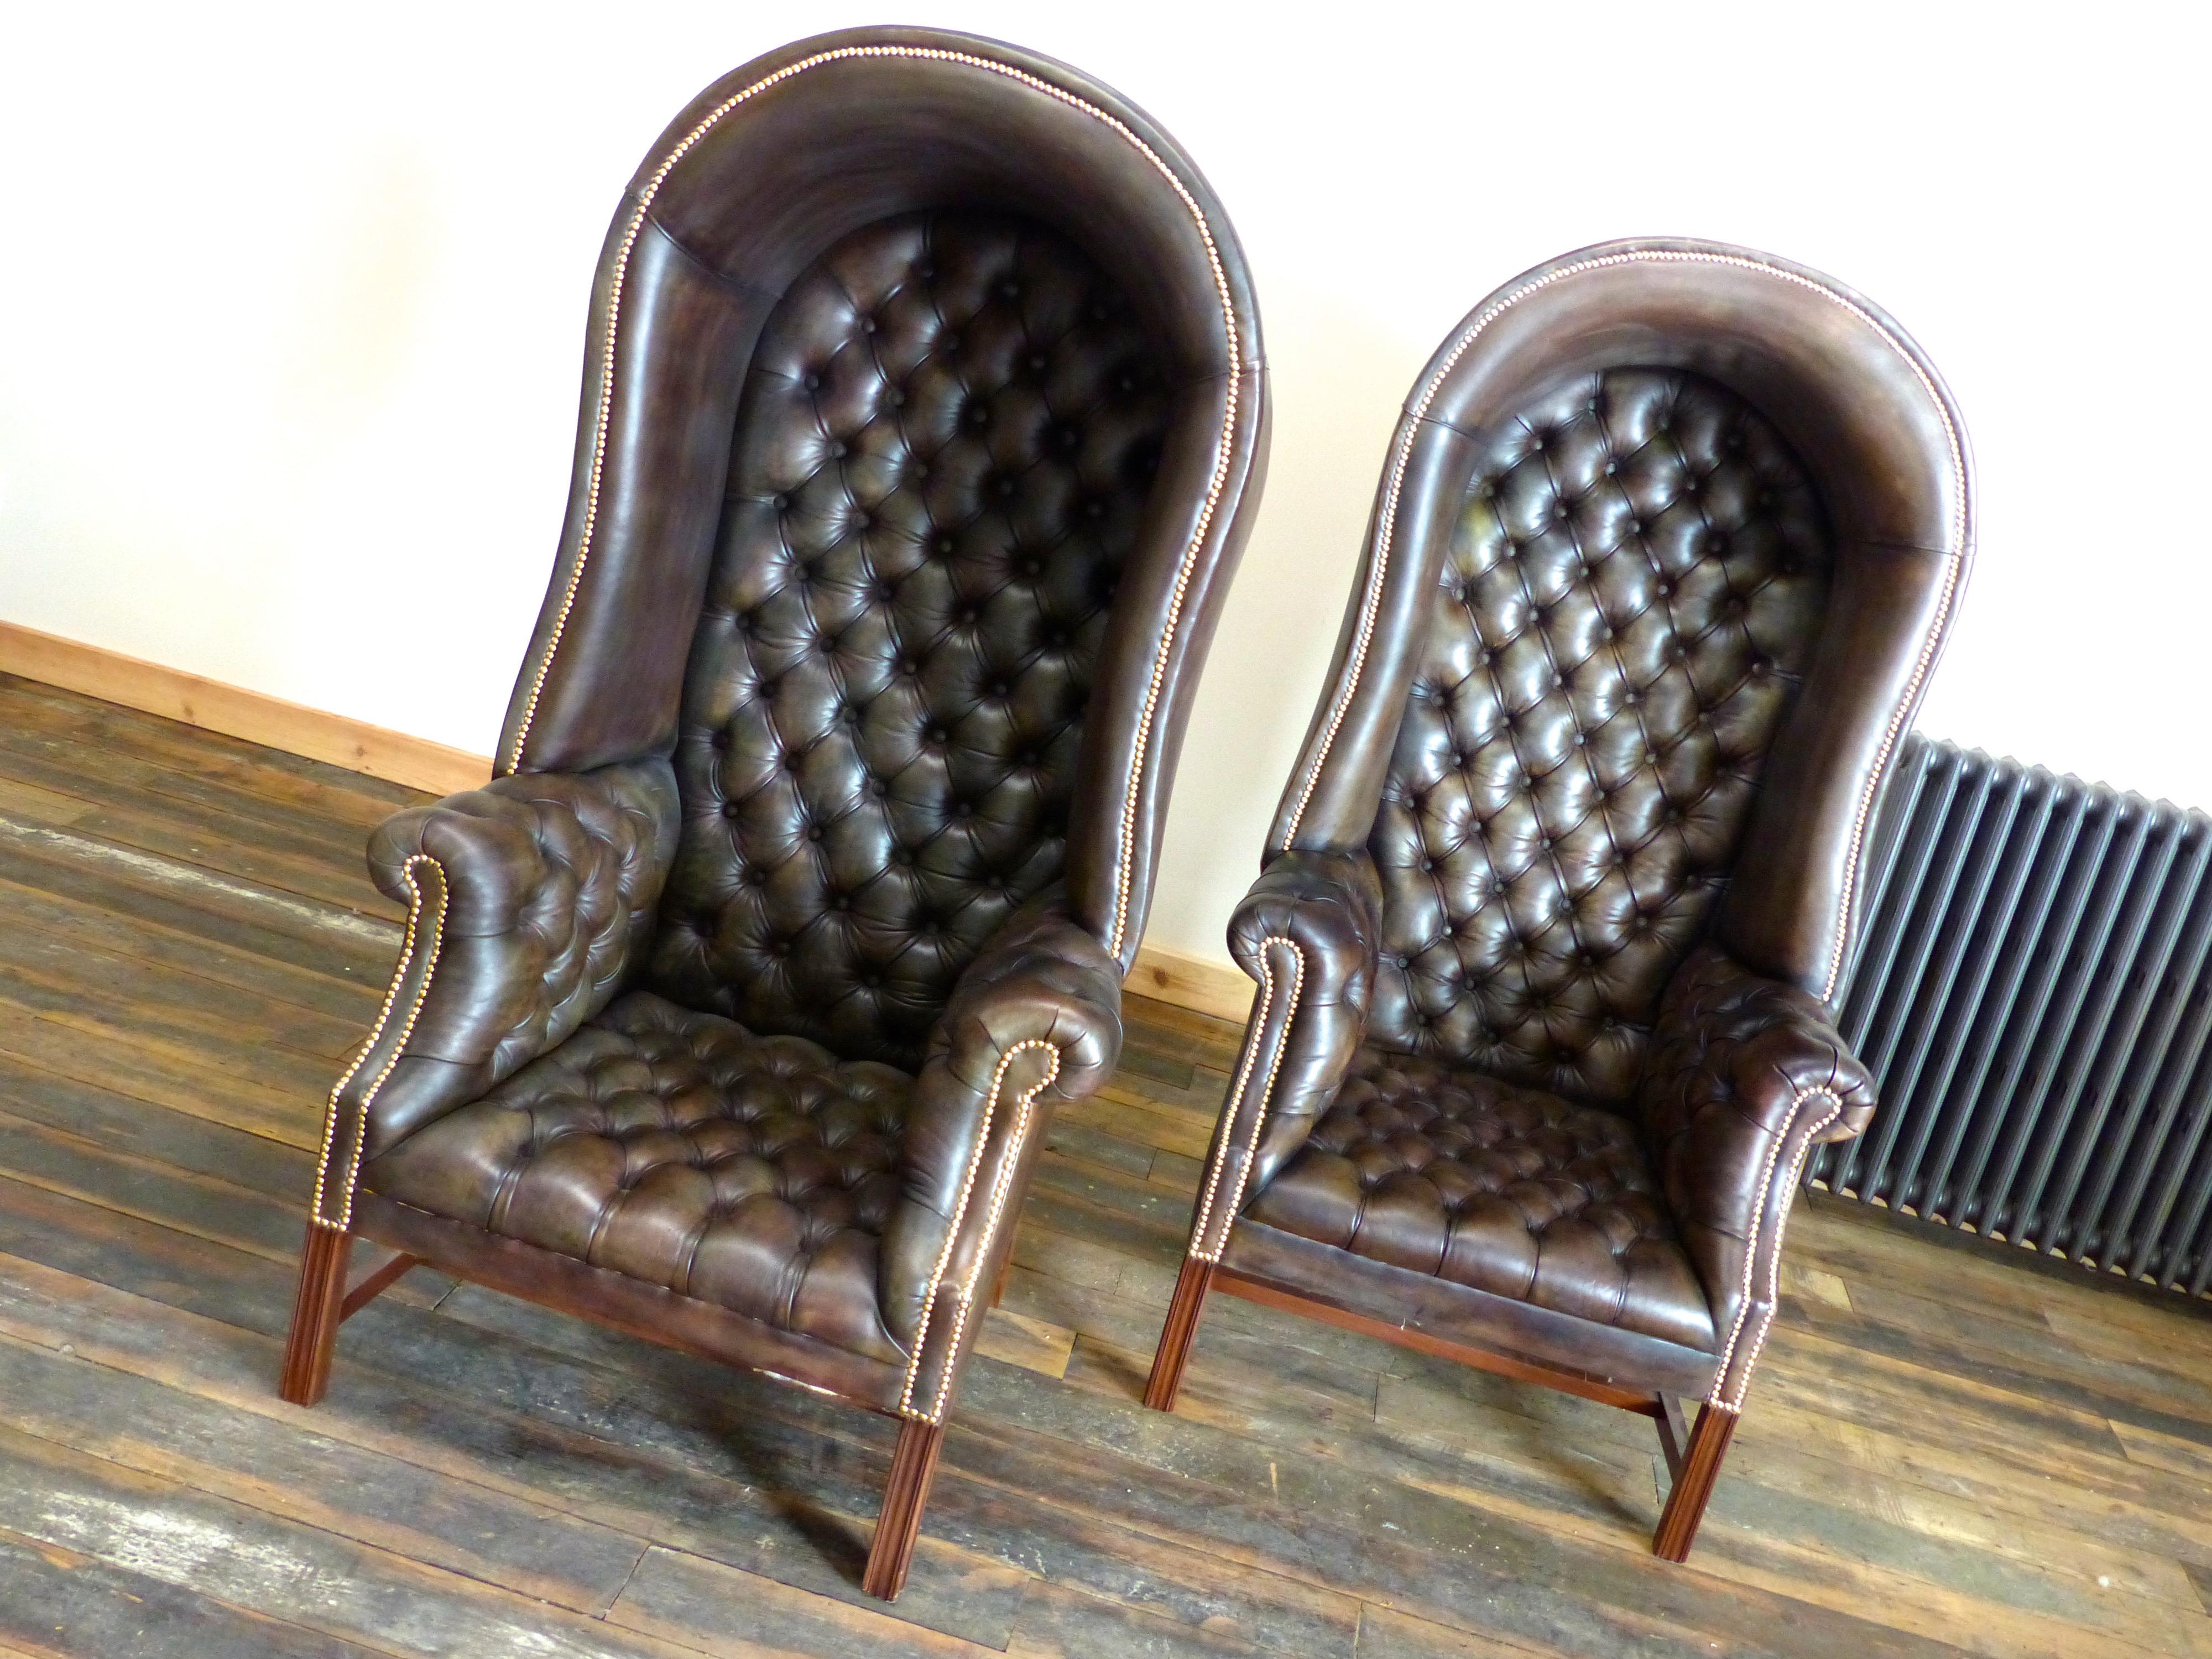 This is. A pair of our Victorian Porters chairs that we craft to order on a bespoke basis.

The style is very honest in its interpretation and feeling.  These pieces bring a great deal of style and gravitas to the space.

We offer six varying